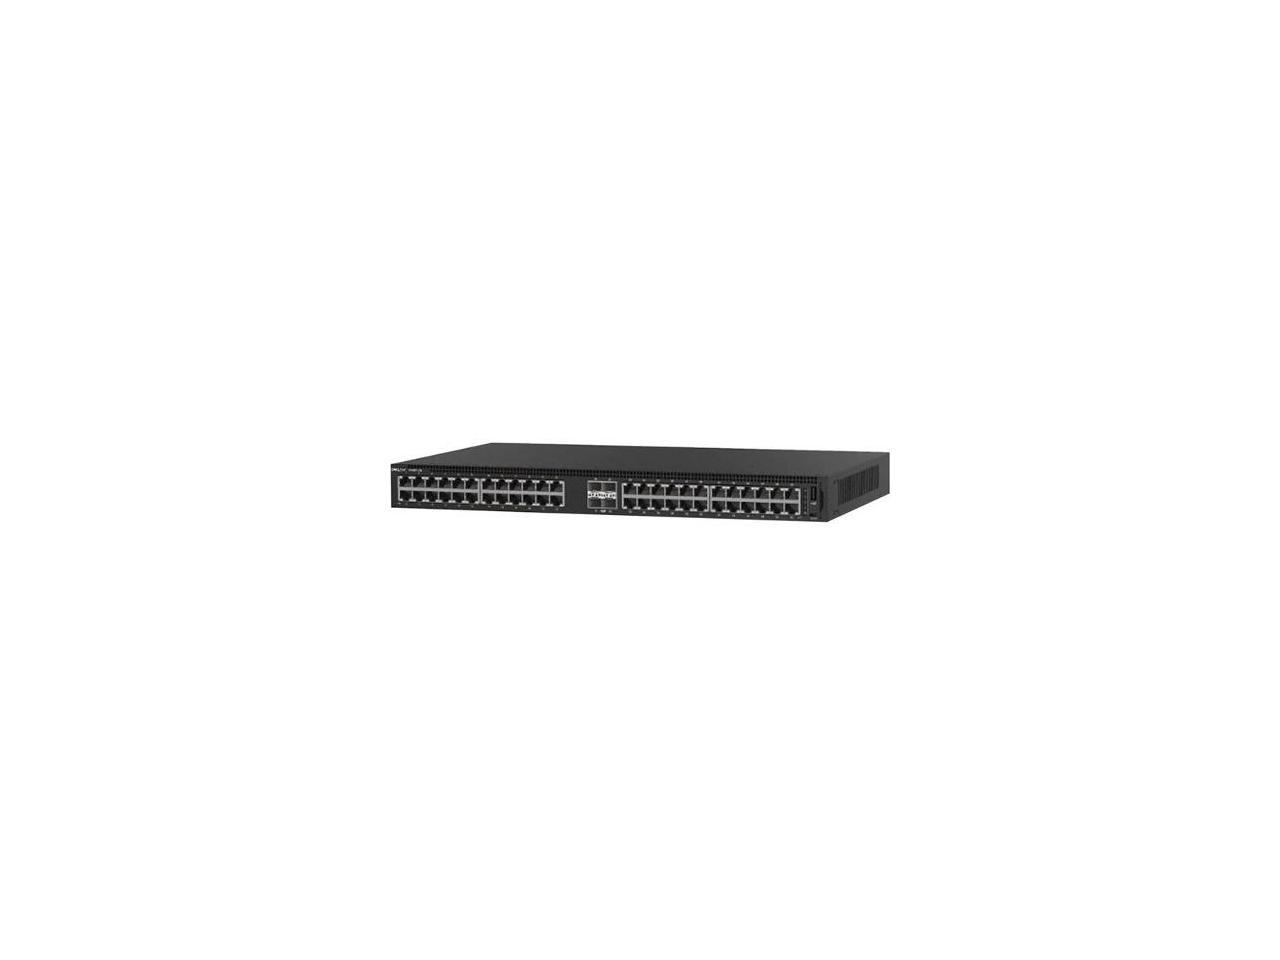 Dell EMC PowerSwitch N1148P-ON Switch - 48 Ports - Manageable - 2 Layer Supported - Modular - Optical Fiber, Twisted Pair - 1U High - Rack-mountable